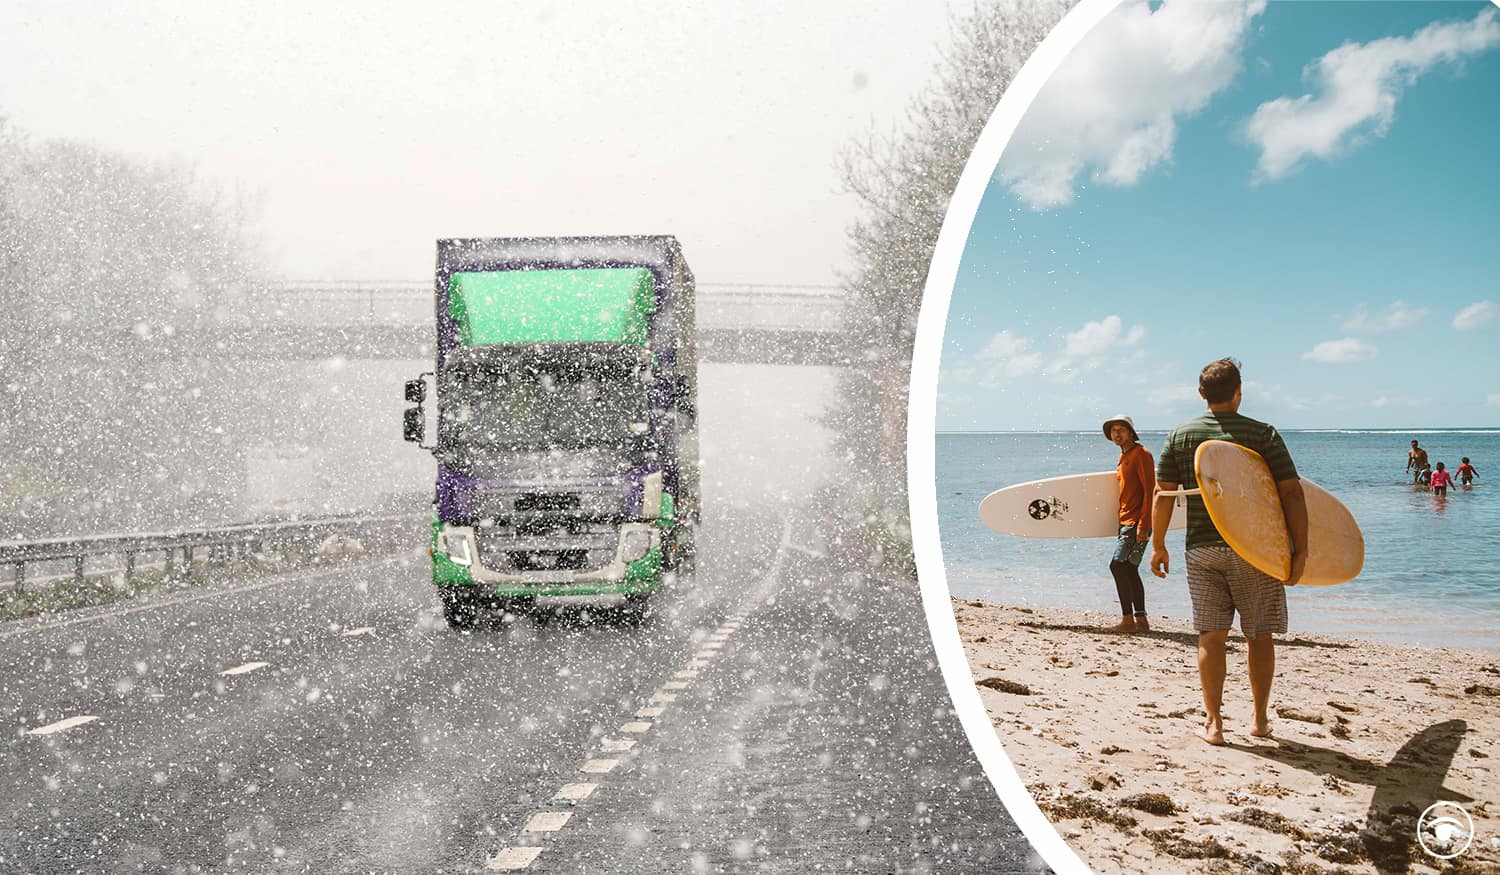 In Pictures: Snow falls across Britain just one week after Mediterranean-style heat wave